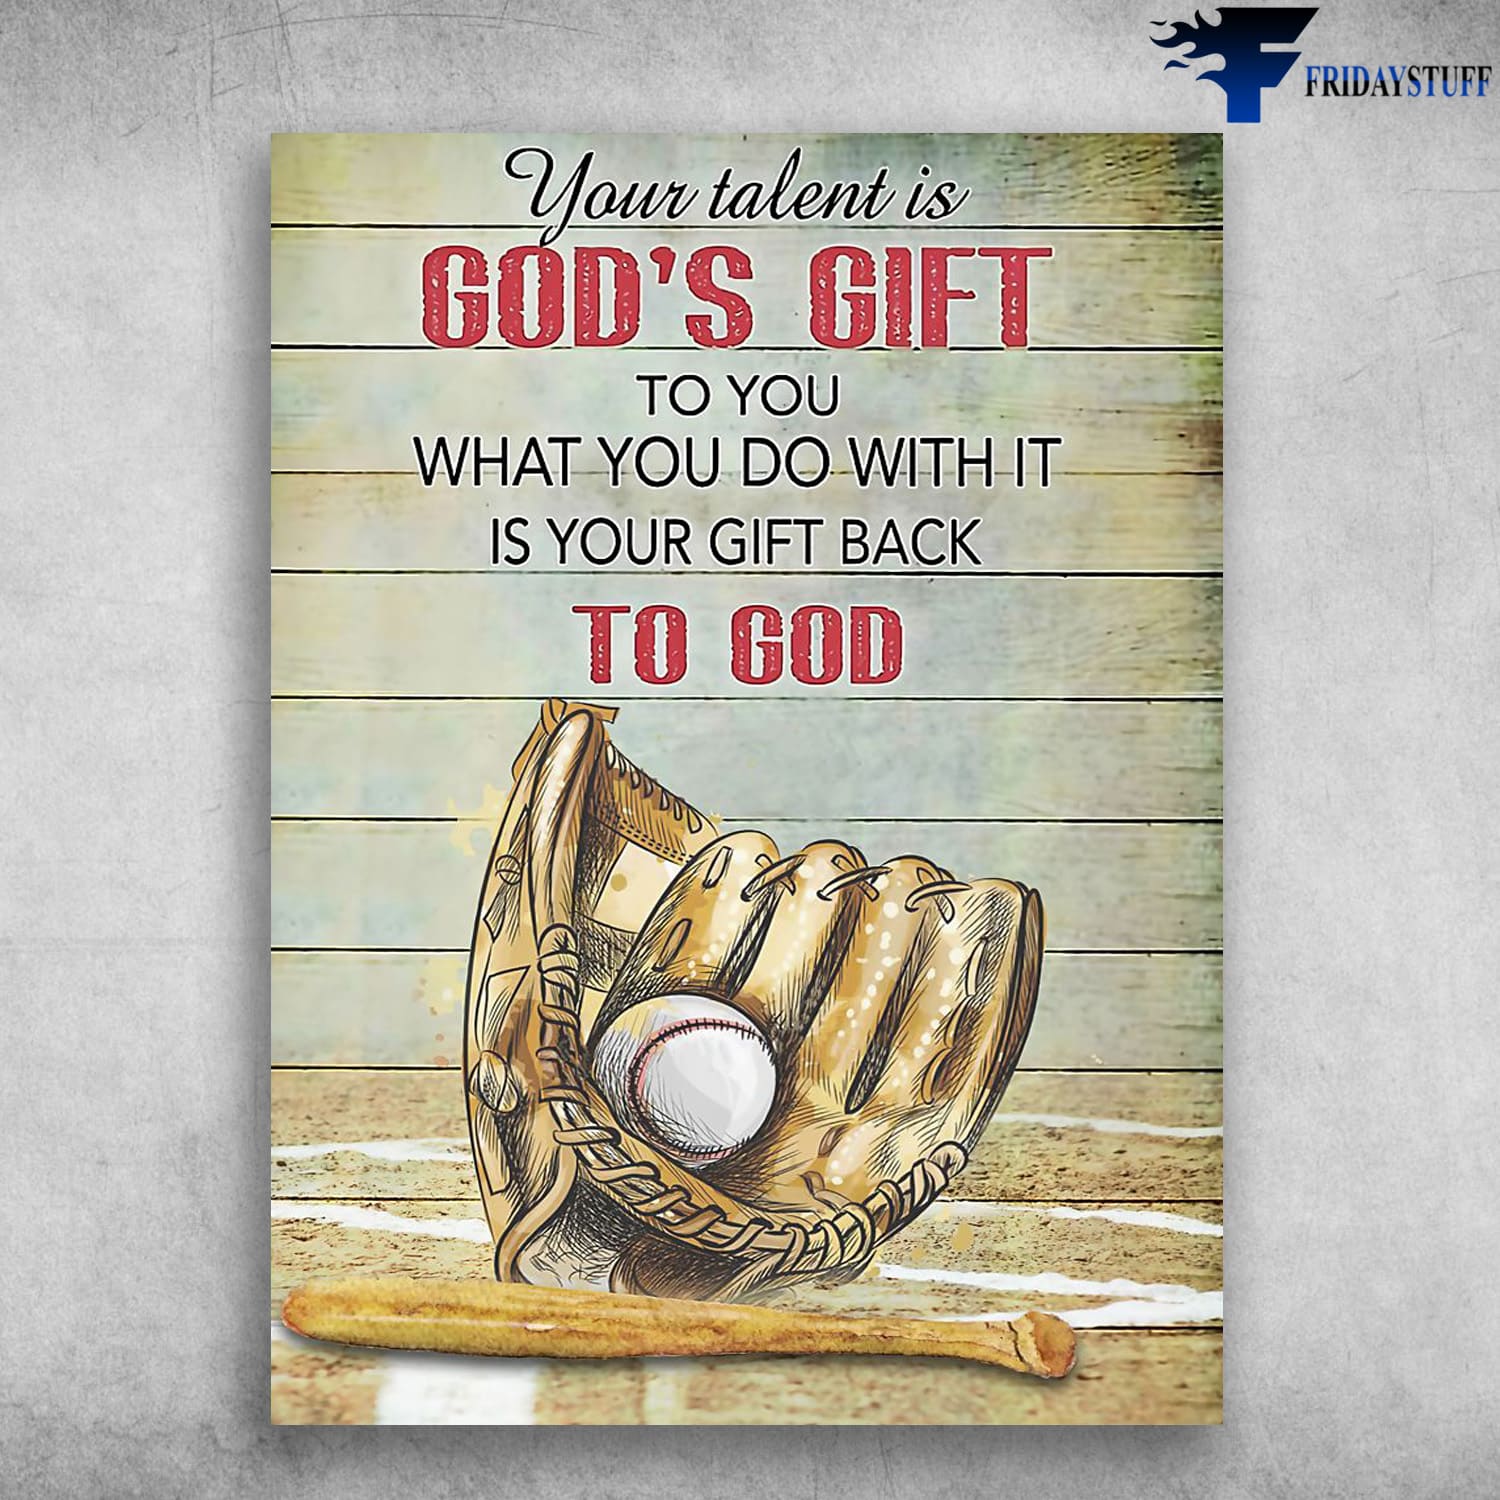 Baseball Poster, Baseball Lover, Your Talent Is God's Gift To You, What You Do With It, Is Your Gift Back To God